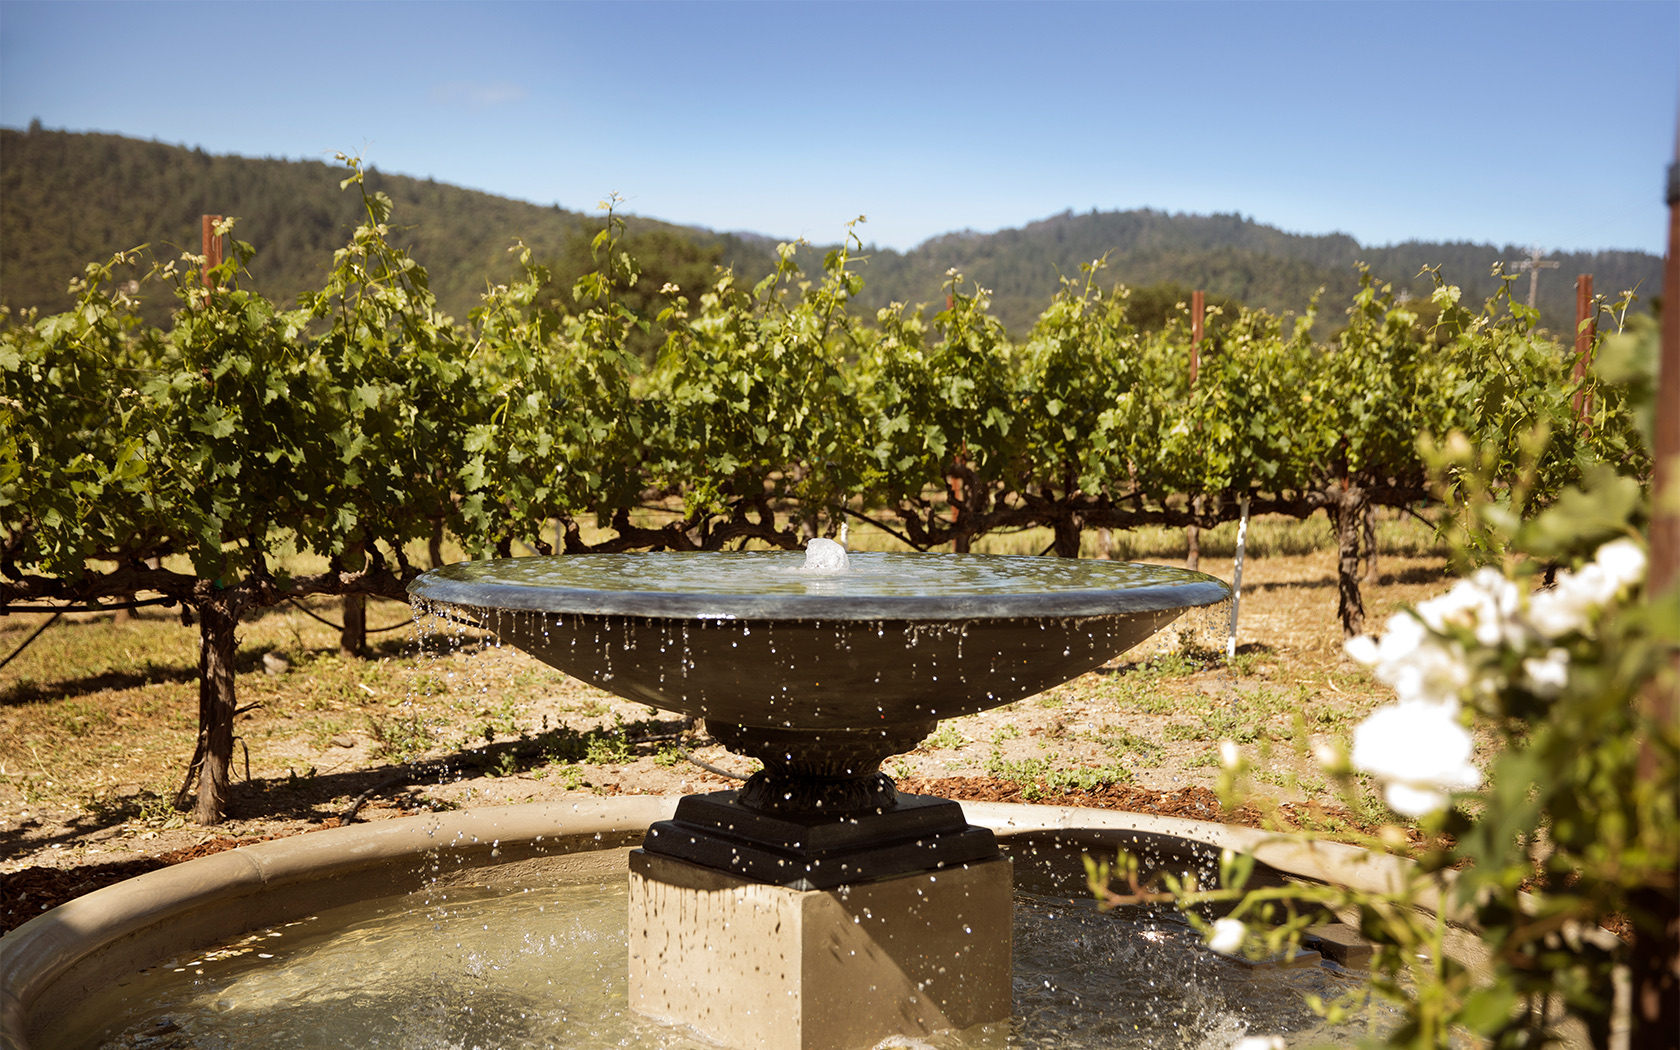 View of a Fountain near to the vineyard